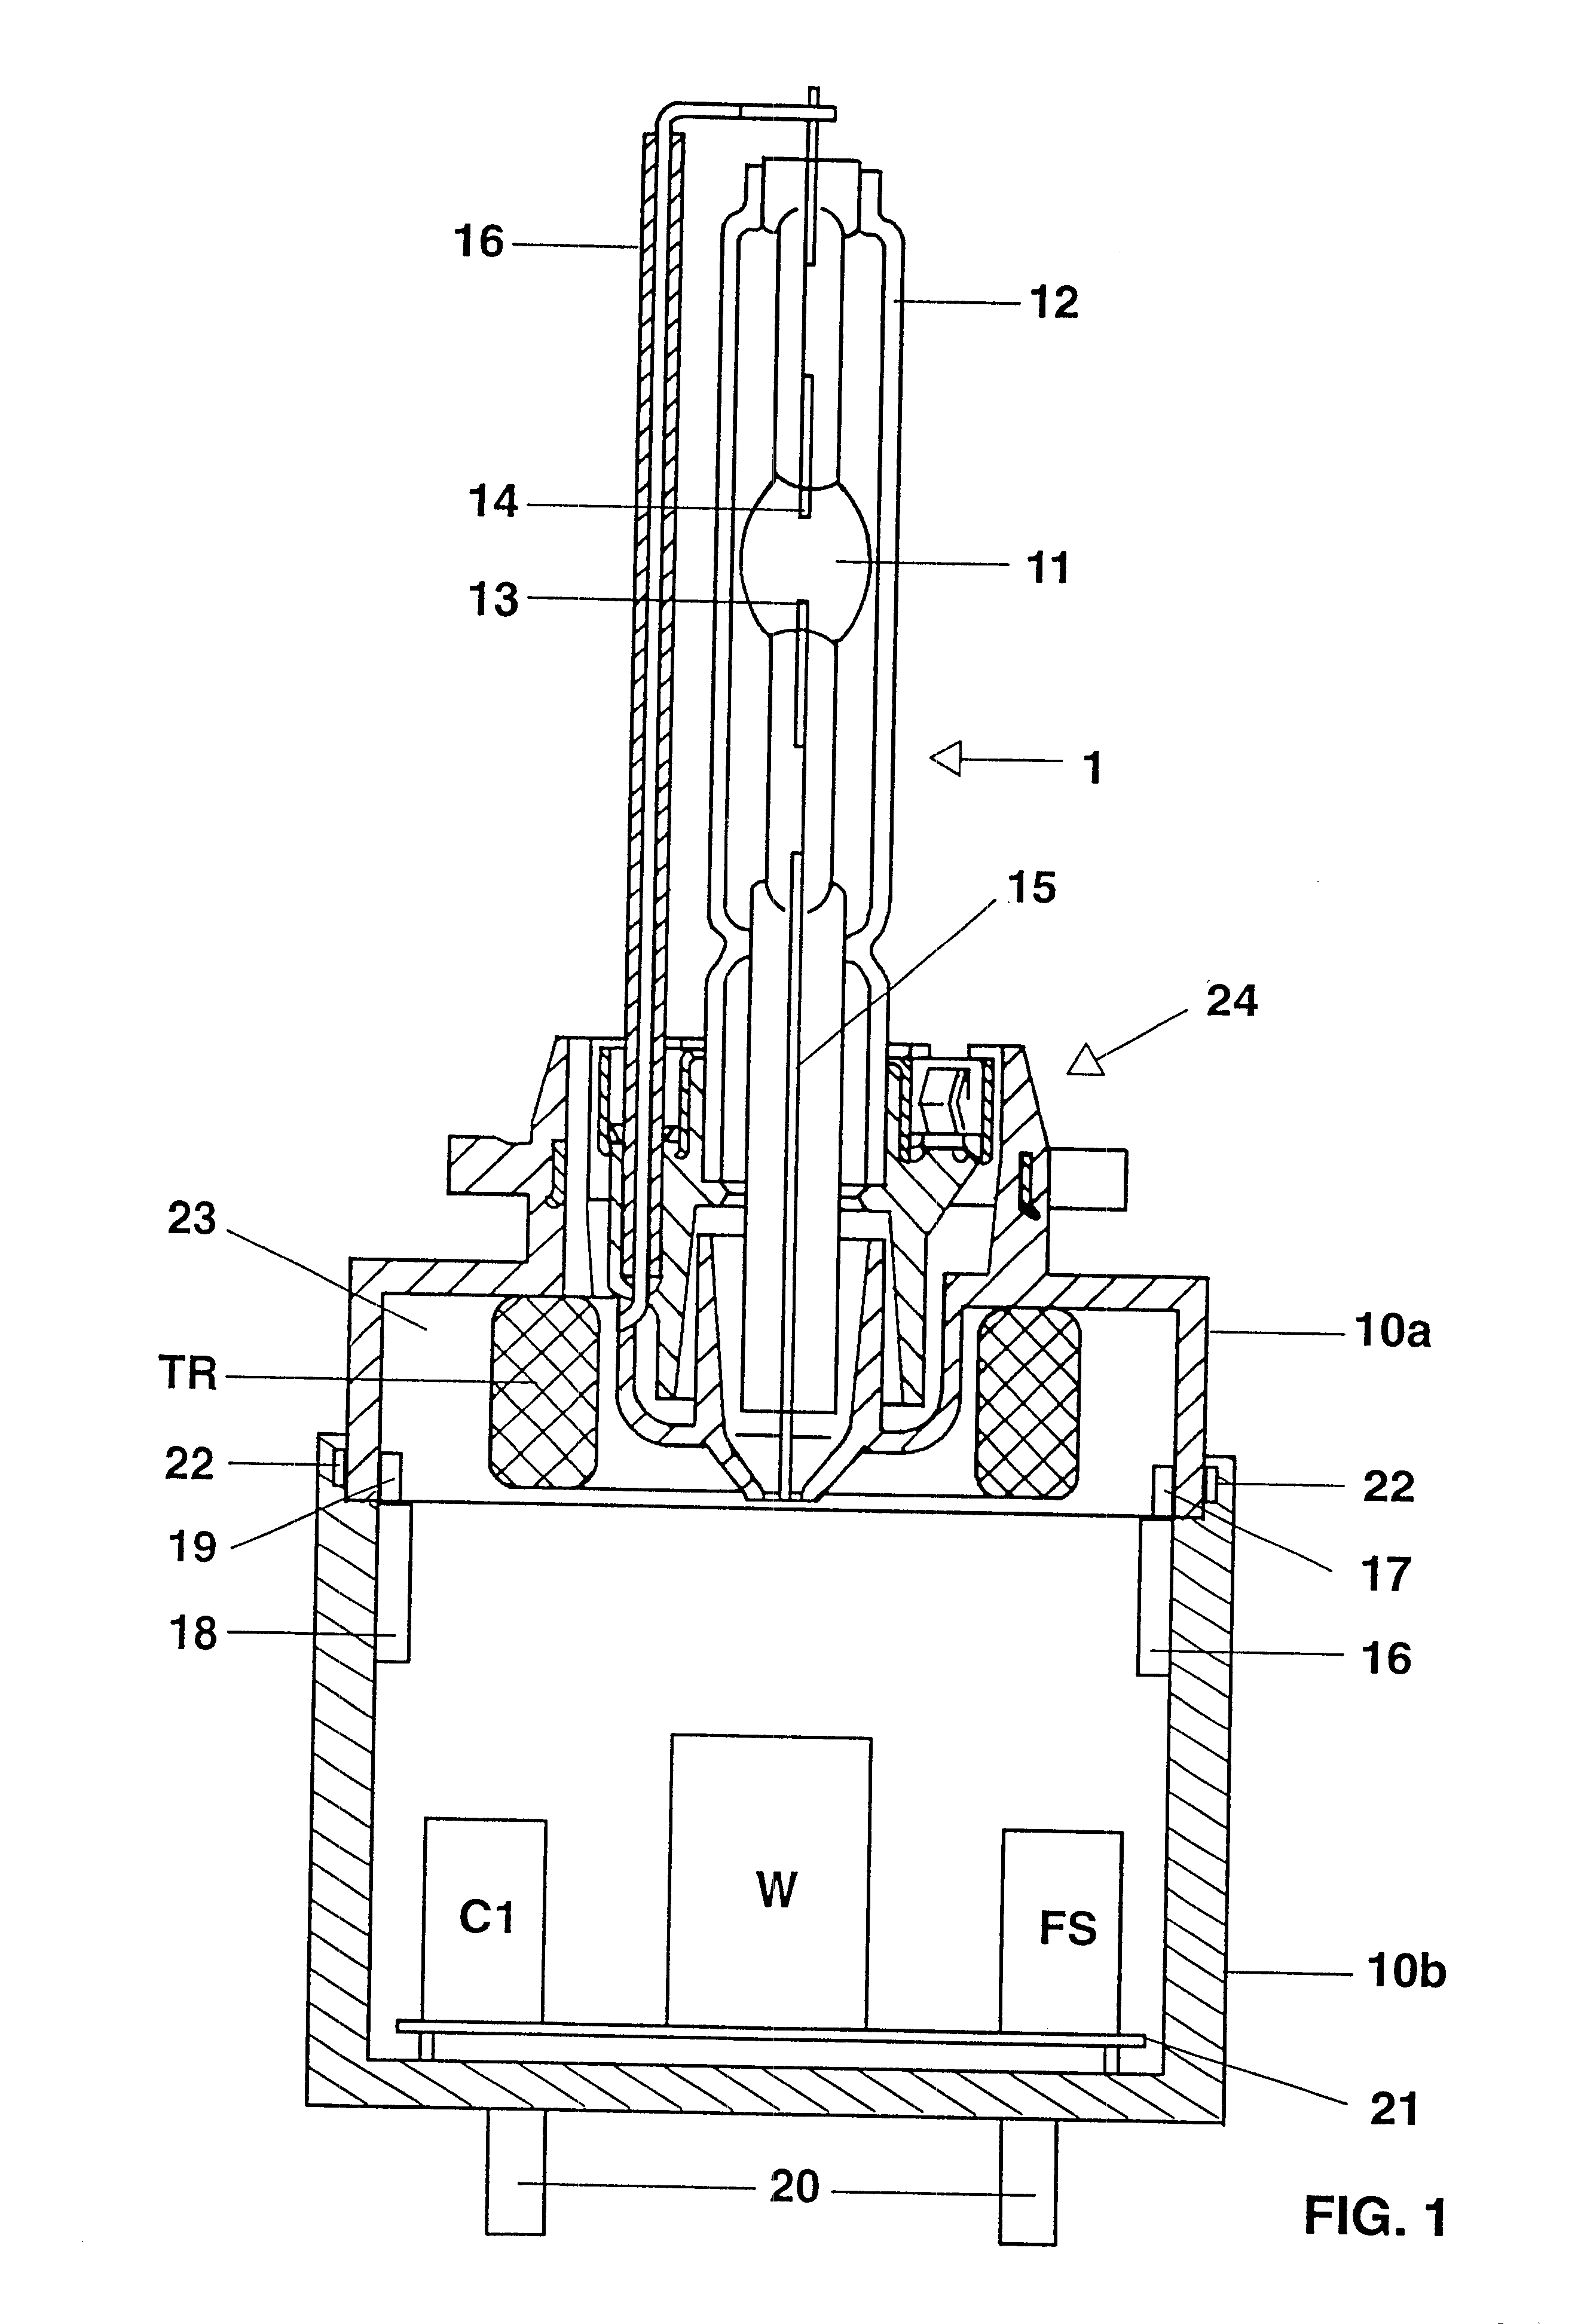 Lighting system with a high-pressure discharge lamp